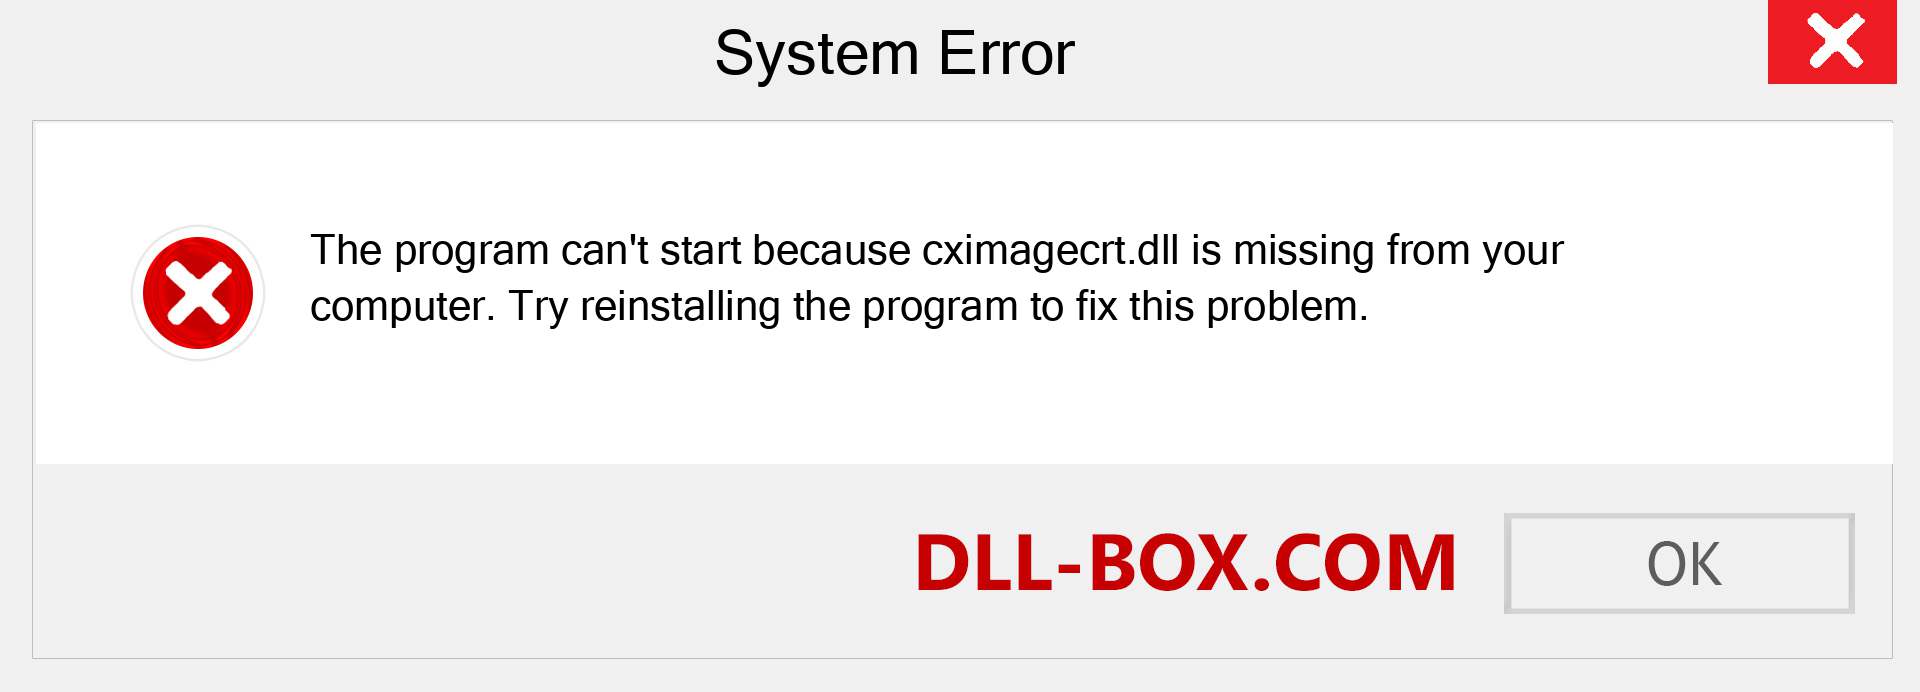  cximagecrt.dll file is missing?. Download for Windows 7, 8, 10 - Fix  cximagecrt dll Missing Error on Windows, photos, images